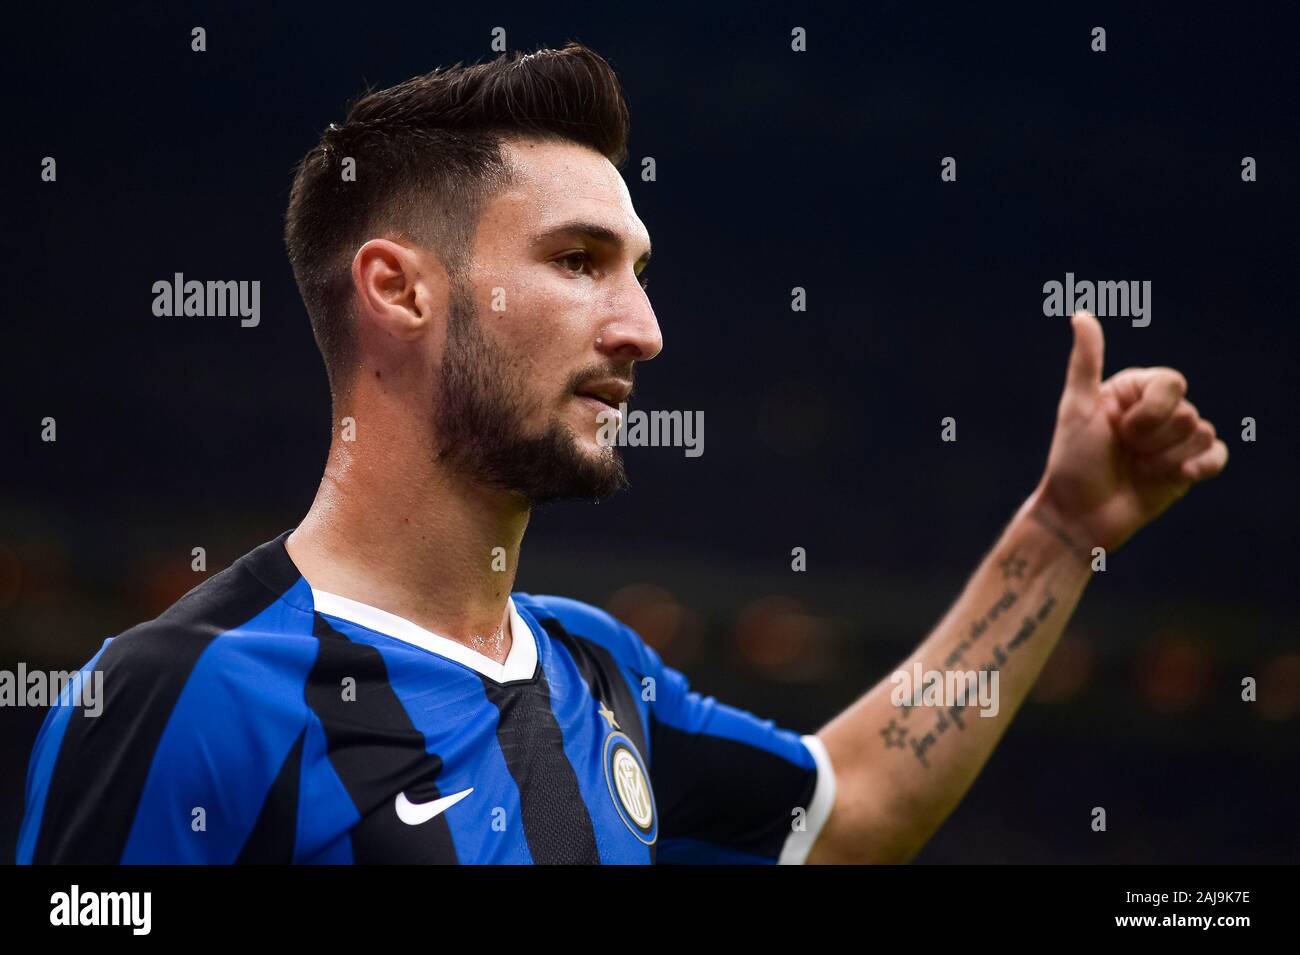 Milan, Italy. 14 September, 2019: Matteo Politano of FC Internazionale gestures during the Serie A football match between FC Internazionale and Udinese Calcio. FC Internazionale won 1-0 over Udinese Calcio. Credit: Nicolò Campo/Alamy Live News Stock Photo